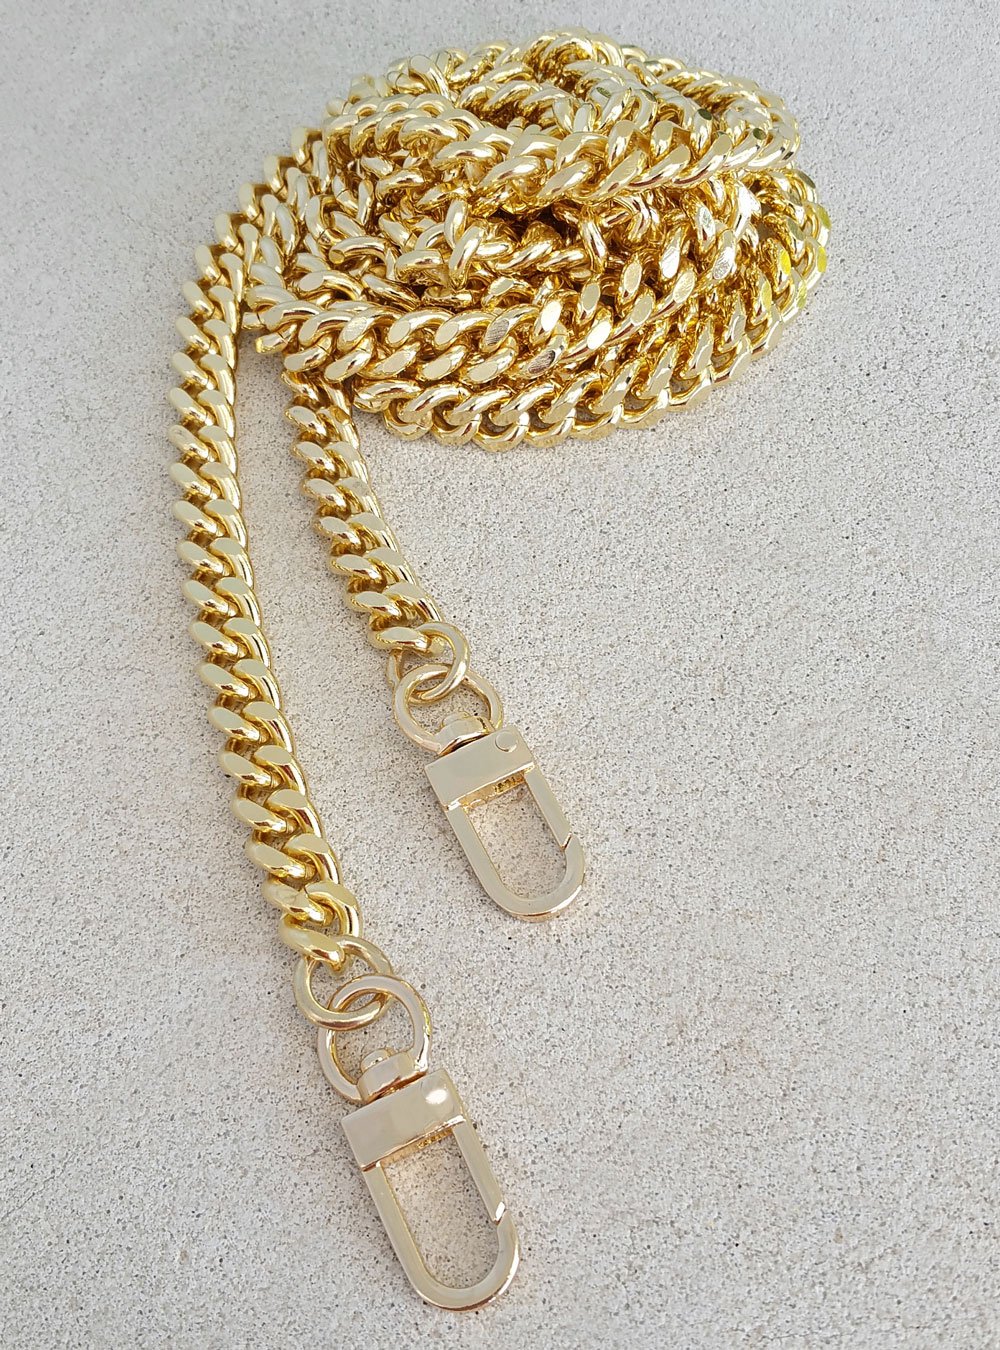 GOLD Chain Bag Strap - Thick Classy Curb w/ Diamond Cut Accents - 3/8 Wide  - Choose Length & Clasps, Replacement Purse Straps & Handbag Accessories -  Leather, Chain & more